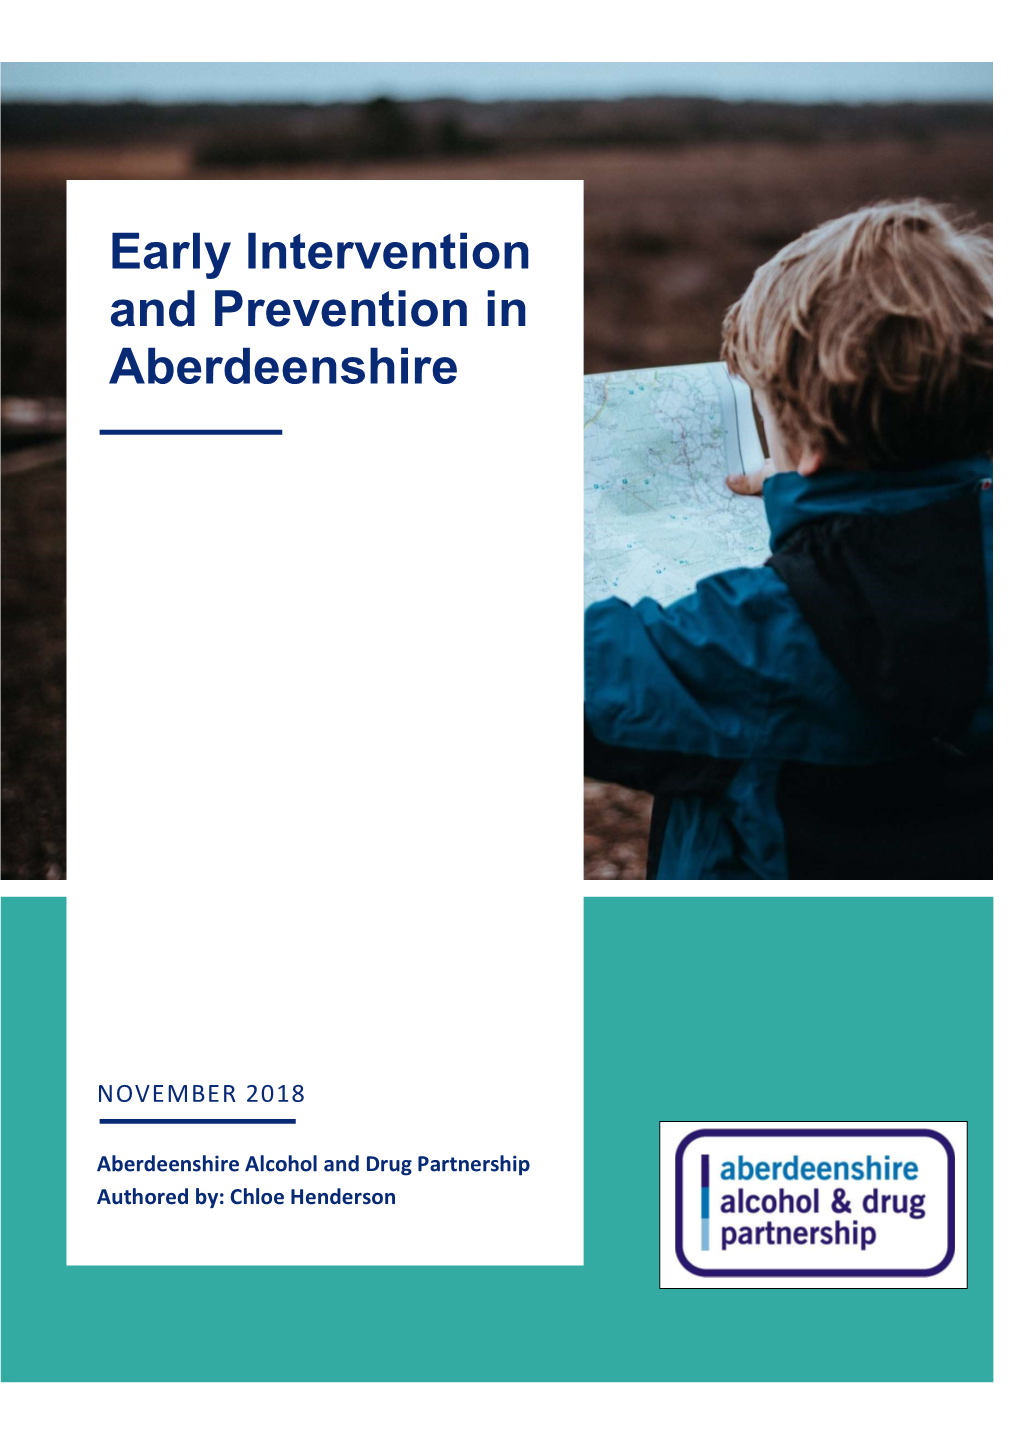 Early Intervention and Prevention in Aberdeenshire